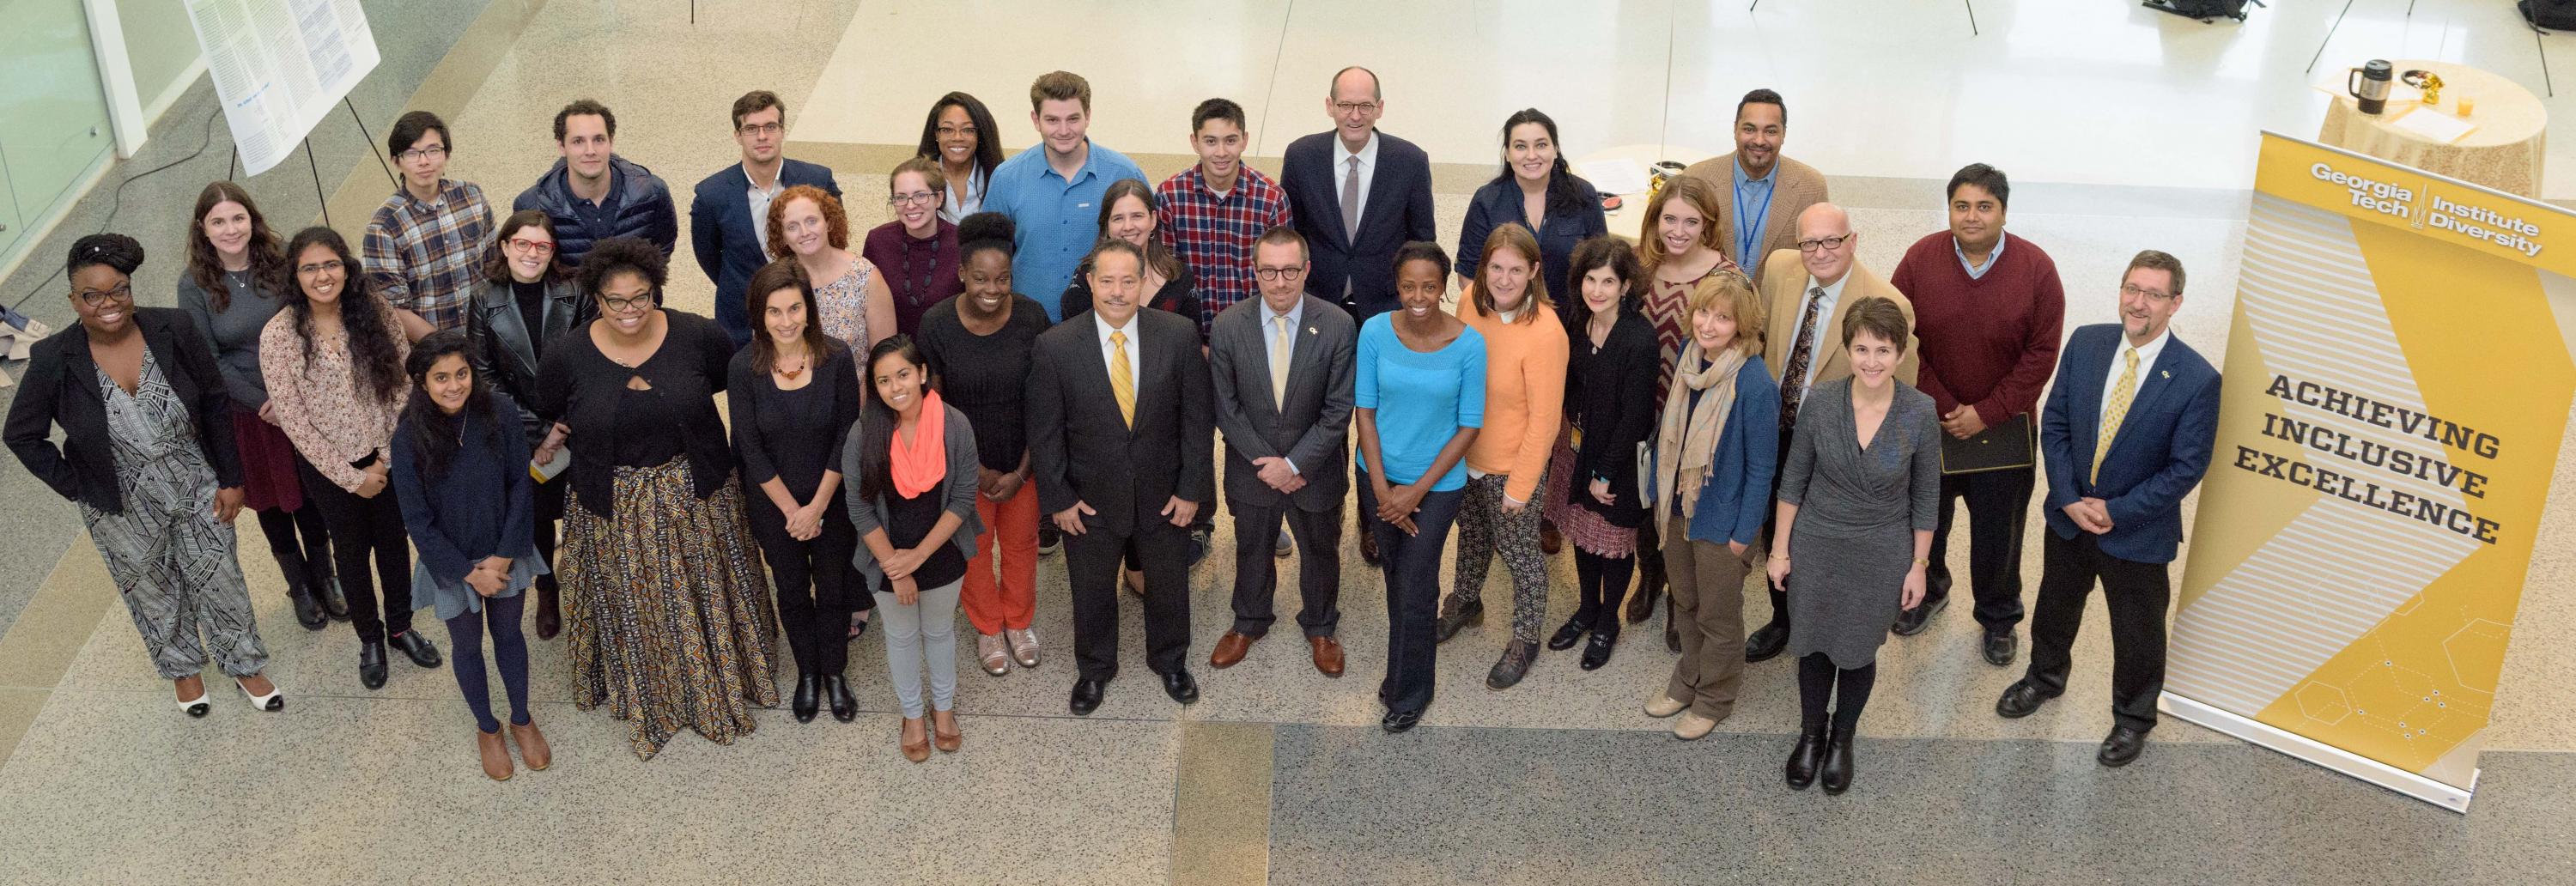 Twenty faculty, staff, and students were recently honored for completing the 2017 Diversity and Inclusion Fellows Program at the program’s poster expo and celebration event. At this event, 21 faculty, staff, and students were also announced to participate in the program in 2018.